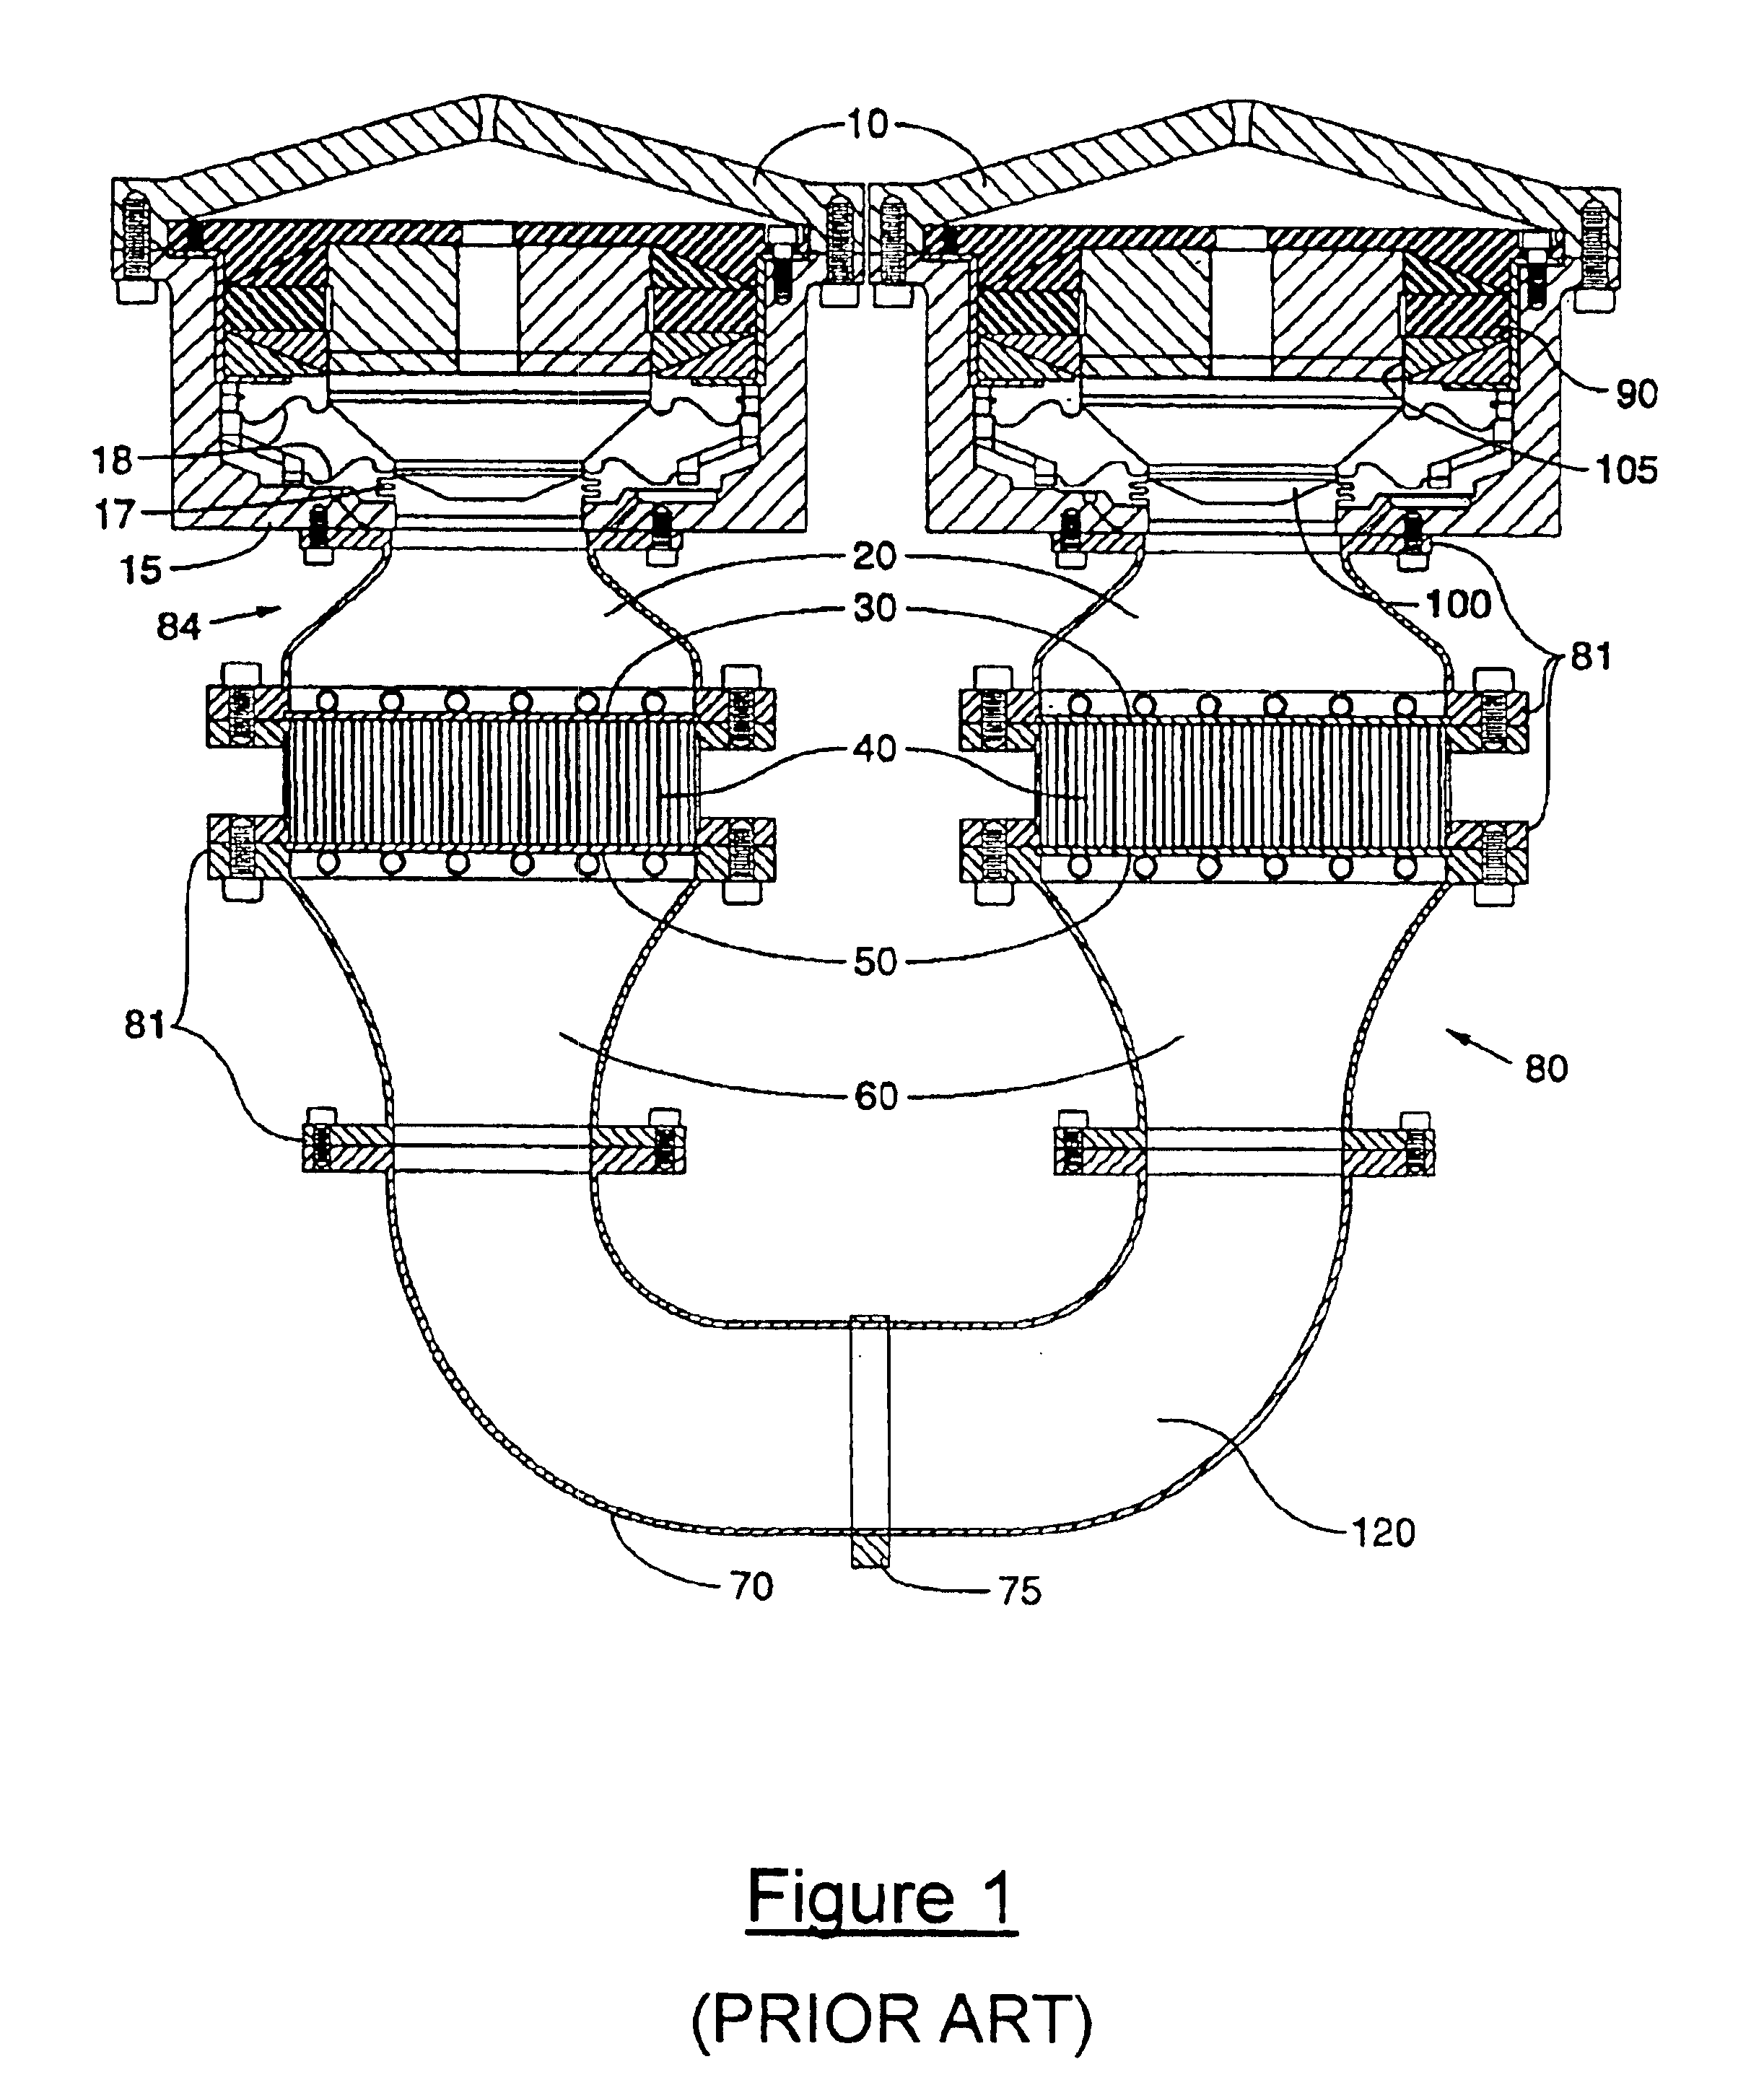 Sensorless control of a harmonically driven electrodynamic machine for a thermoacoustic device or variable load